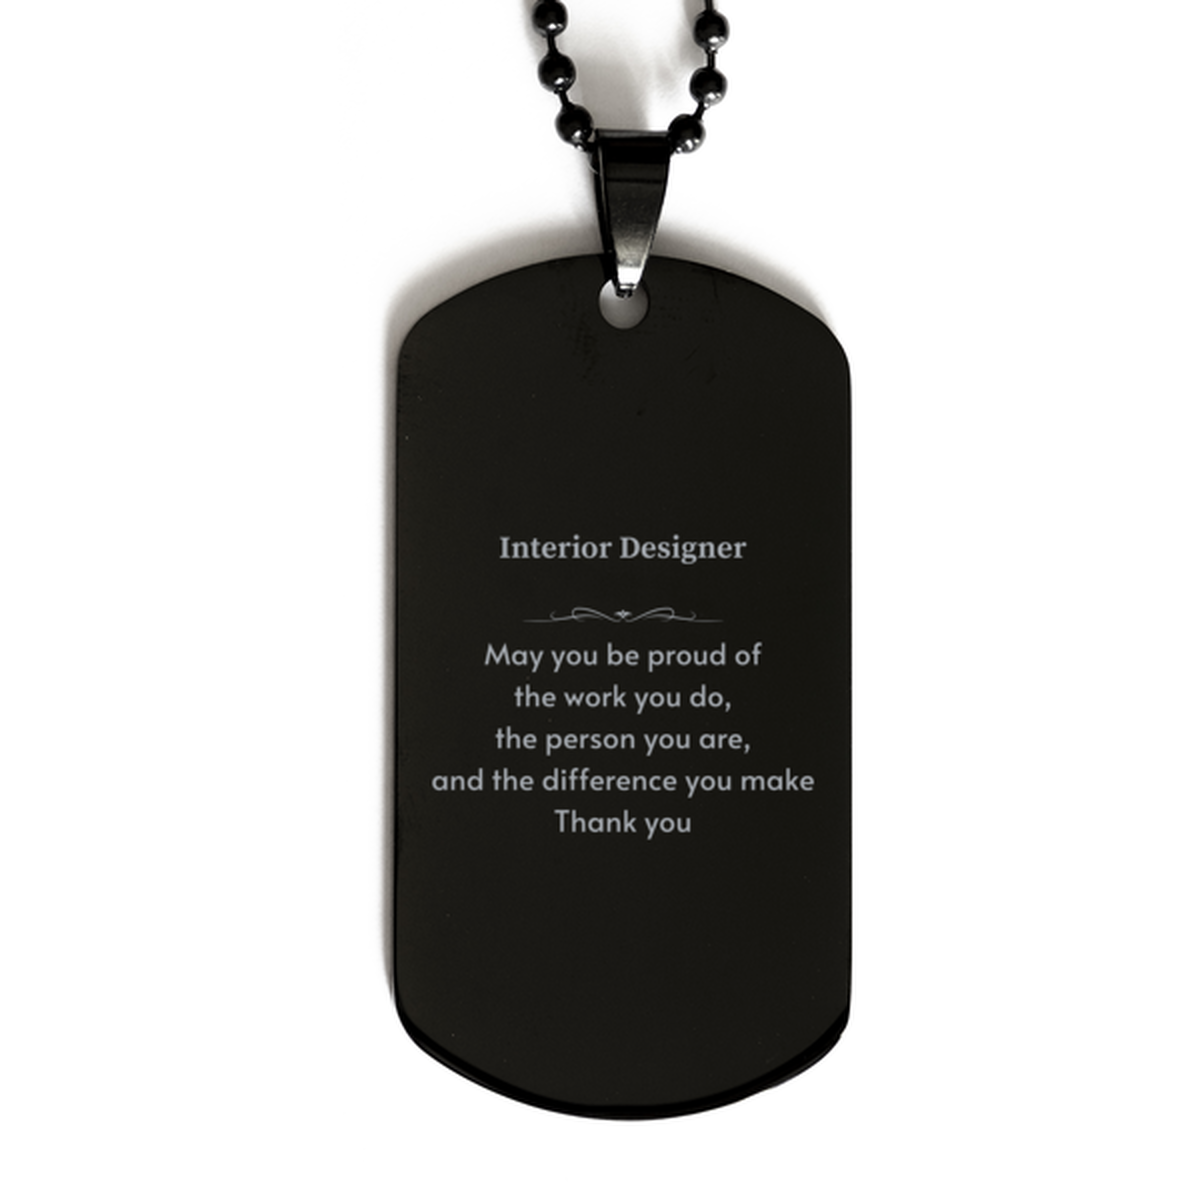 Heartwarming Black Dog Tag Retirement Coworkers Gifts for Interior Designer, Interior Designer May You be proud of the work you do, the person you are Gifts for Boss Men Women Friends